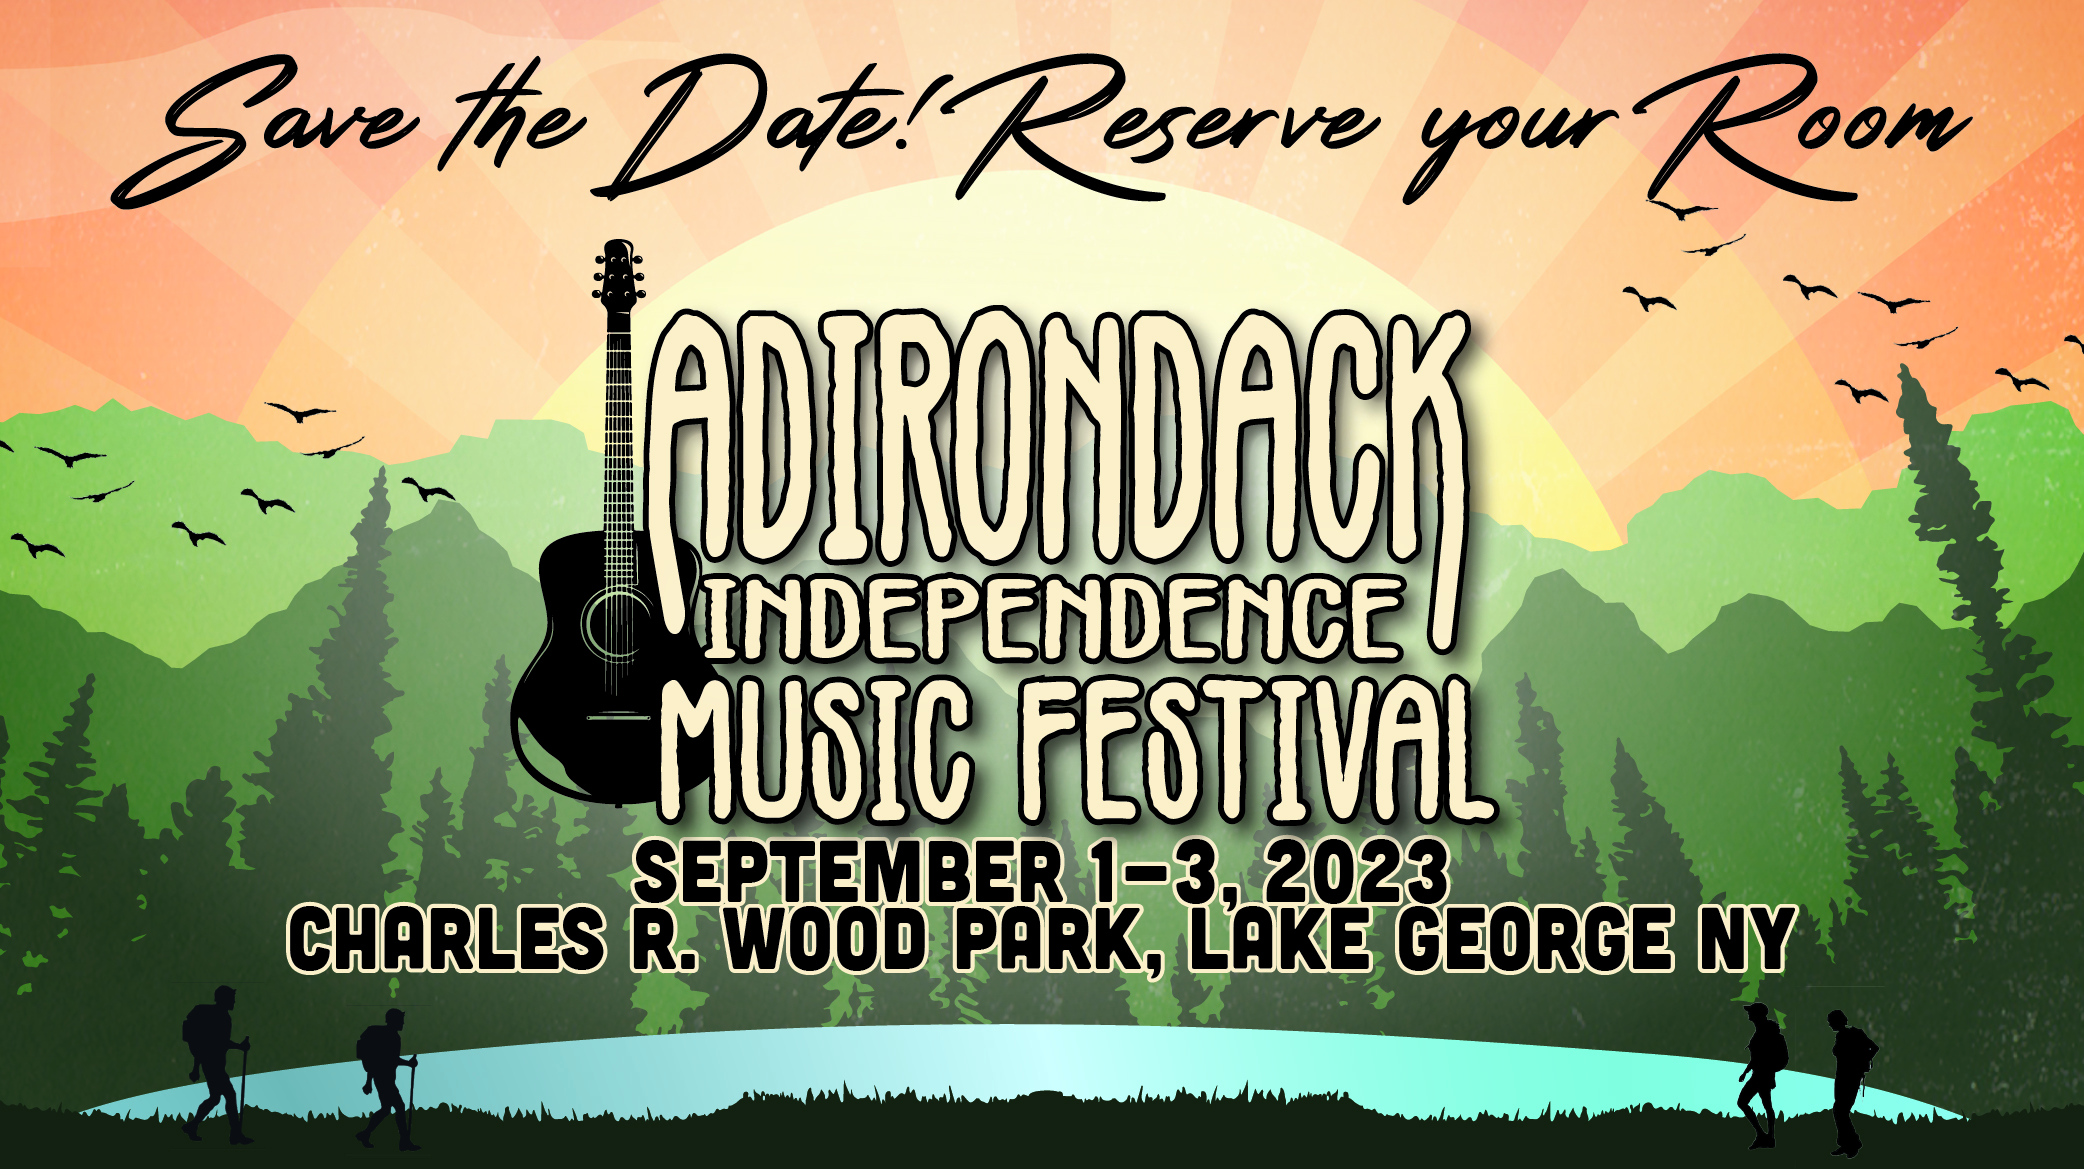 Save the Date: ADK Music Fest Sept. 1-3, 2023